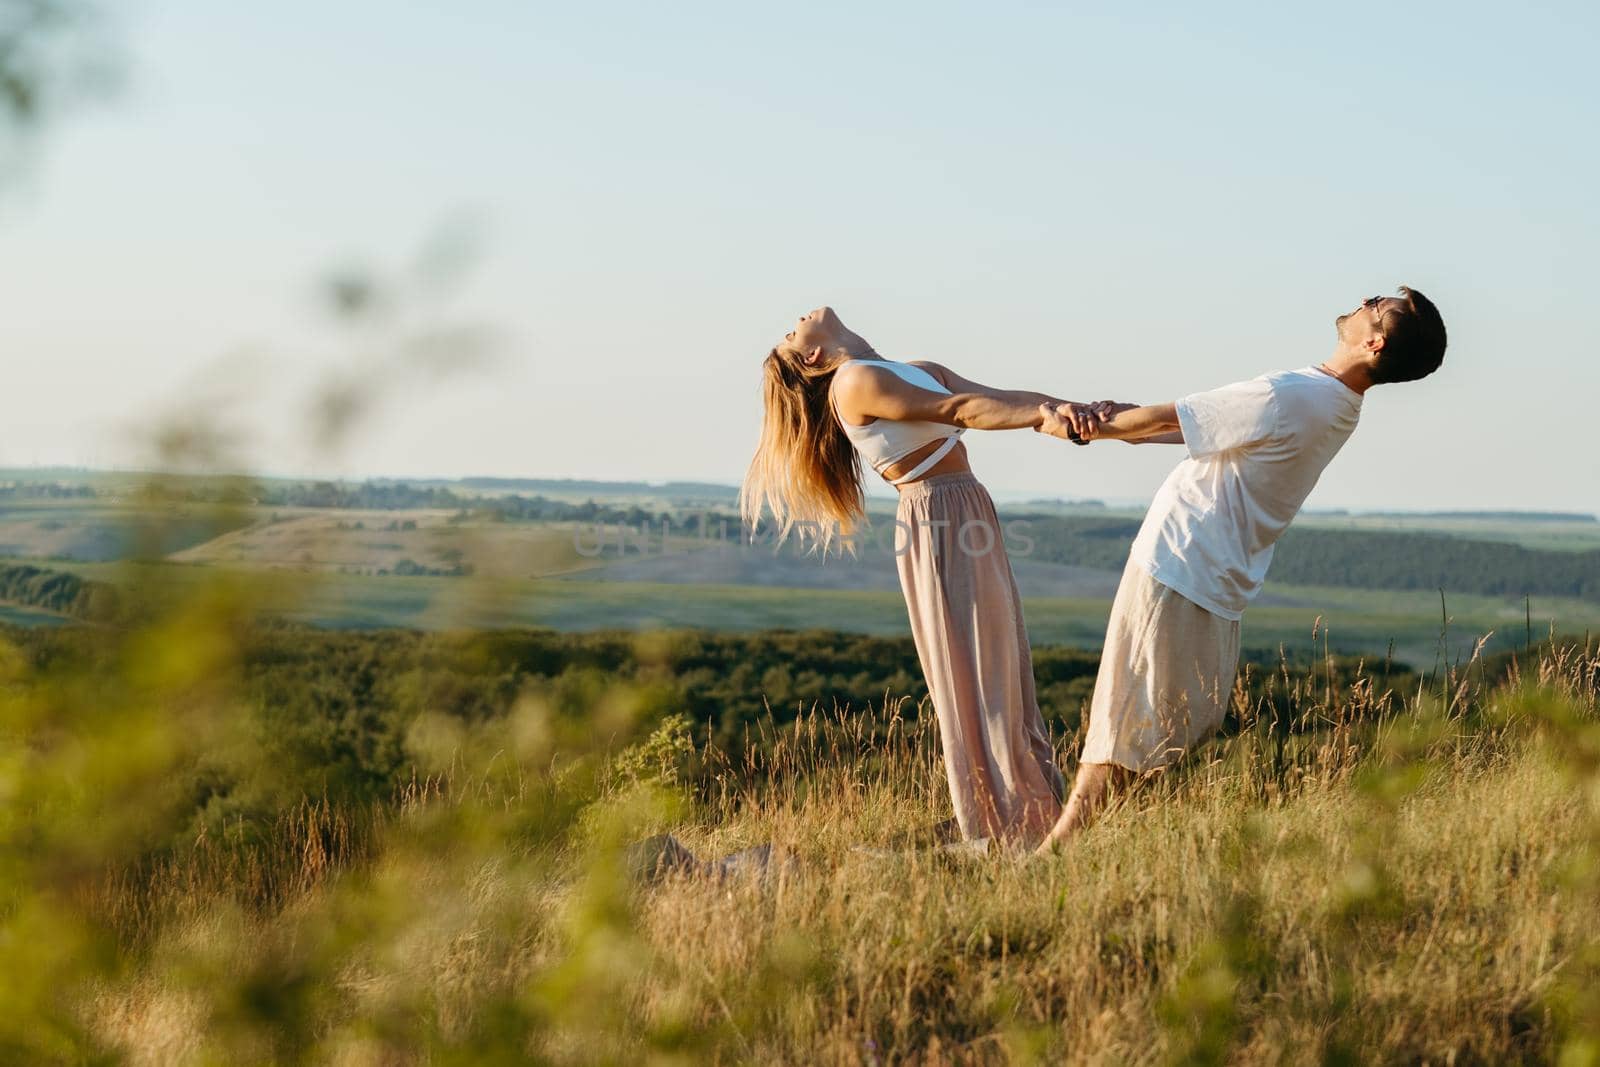 Young Adult Couple Holding by Hands, Man and Woman Practicing Yoga Outdoors with Scenic Landscape on Background at Sunset